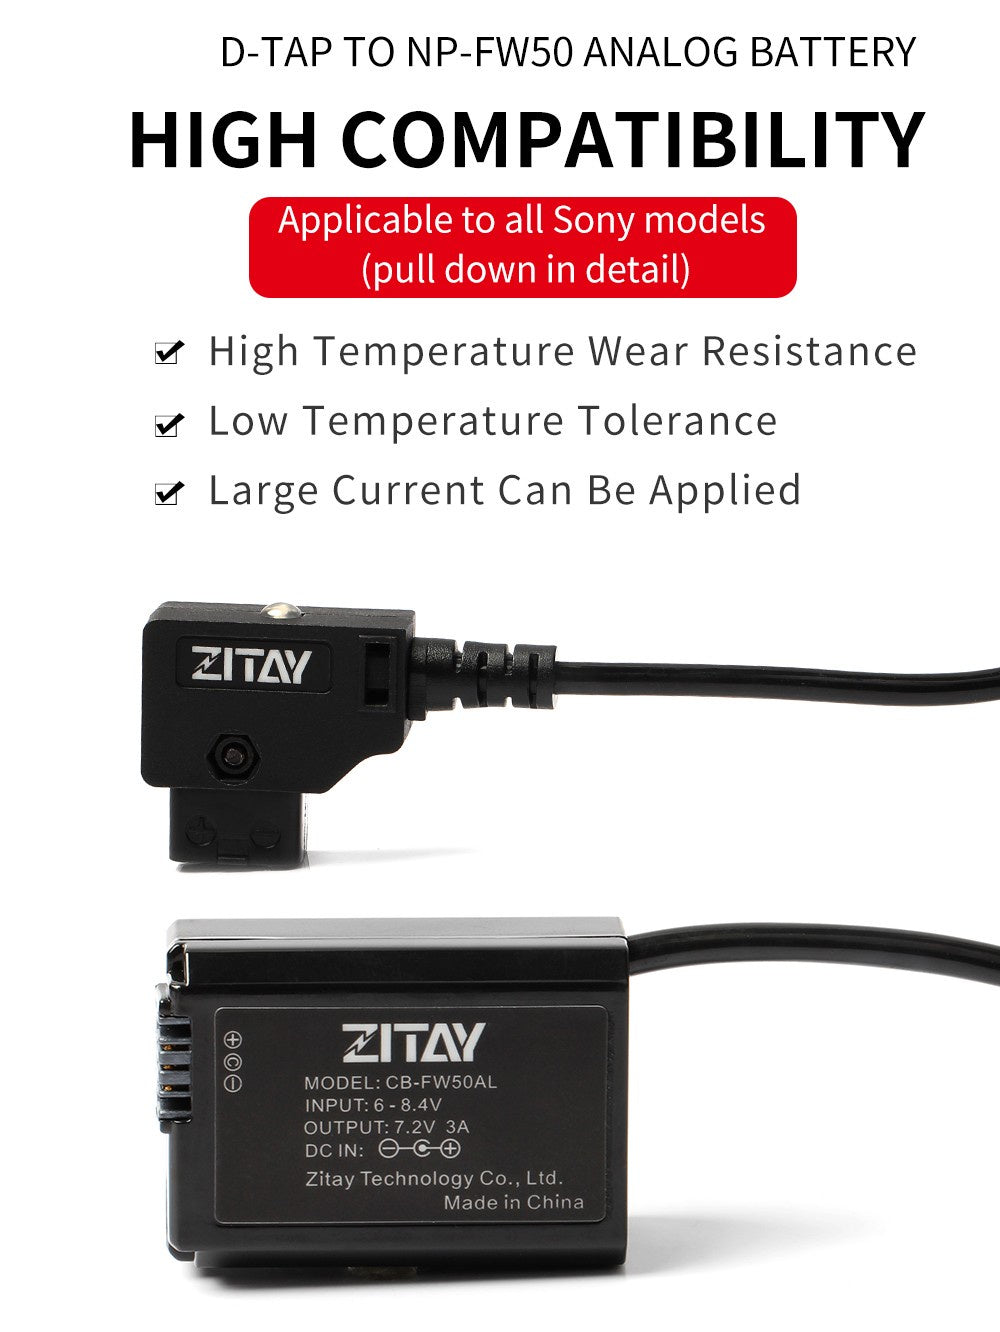 CCTECH　Dummy　FW50　D-TAP　–　Straight　battery　转FW50监视器供　Dtap　Zitay　Cable　to　RiceballPhoto